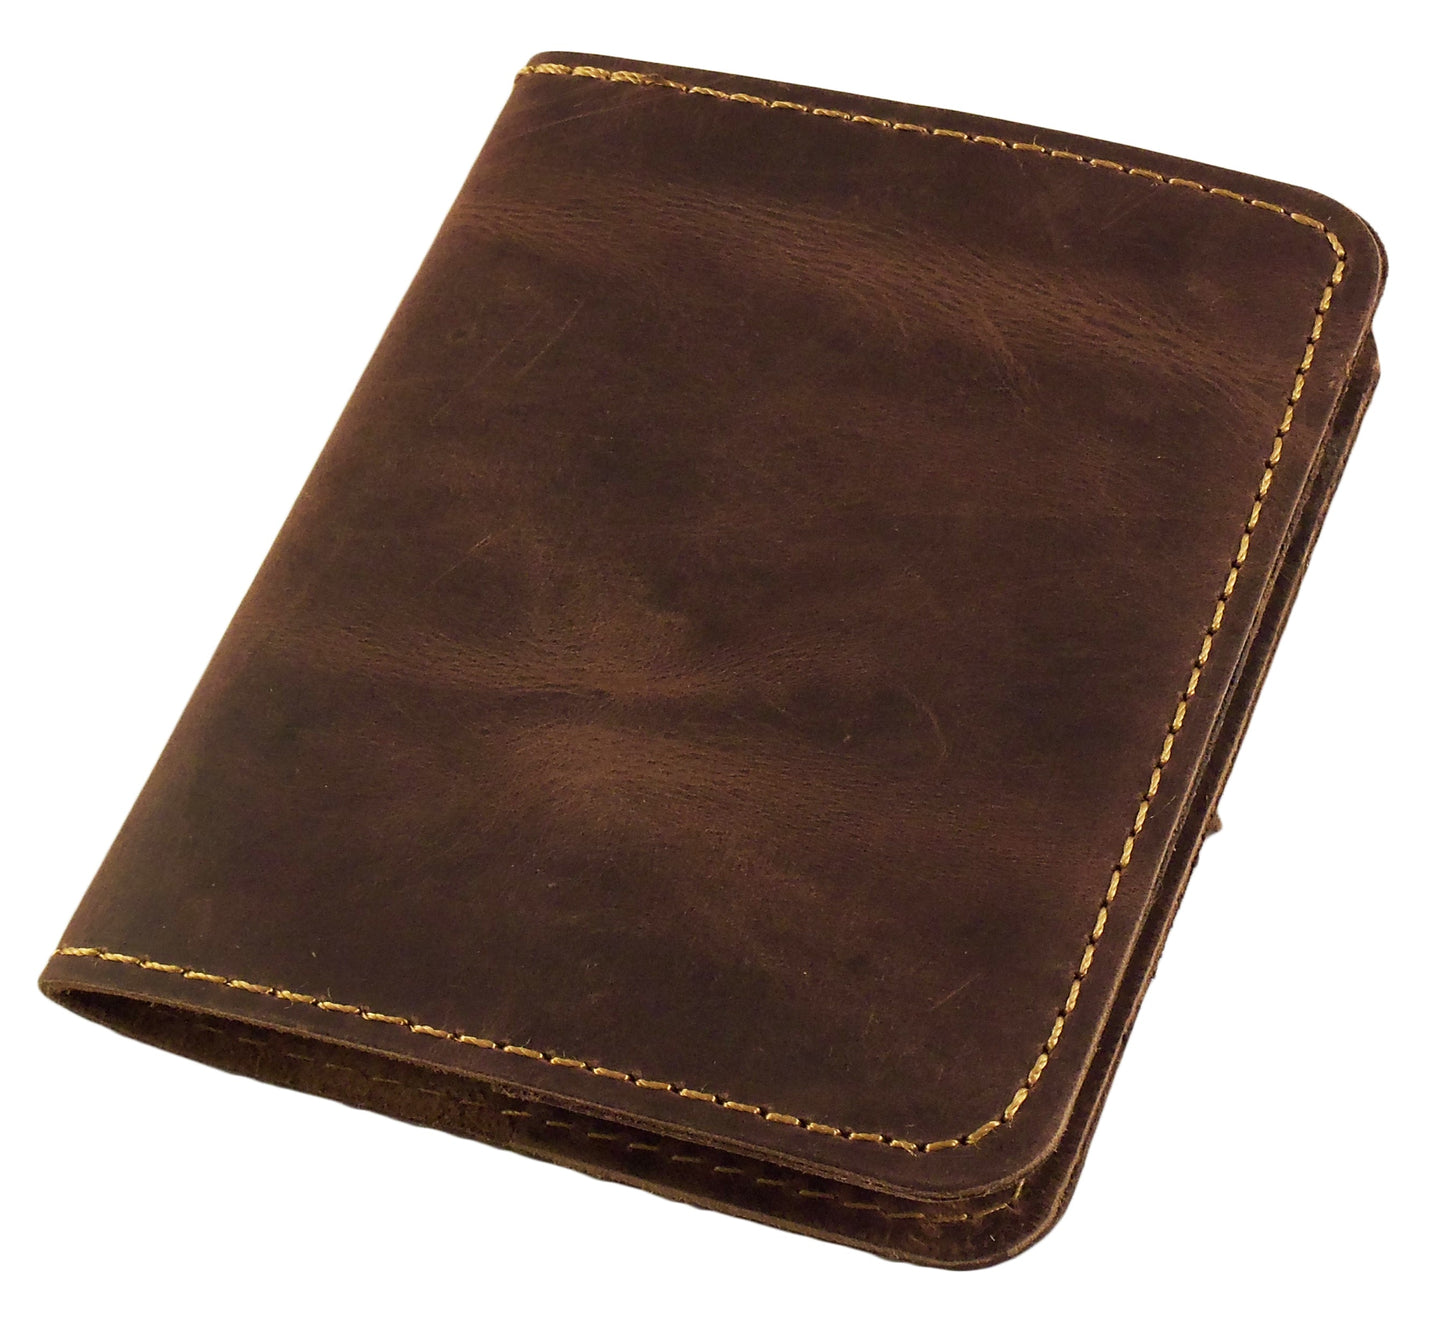 Refillable Leather Pocket Notebook - Mini Composition Cover - Fits Standard  4.5 x 3.25 Mini Composition Book (Dark Brown)